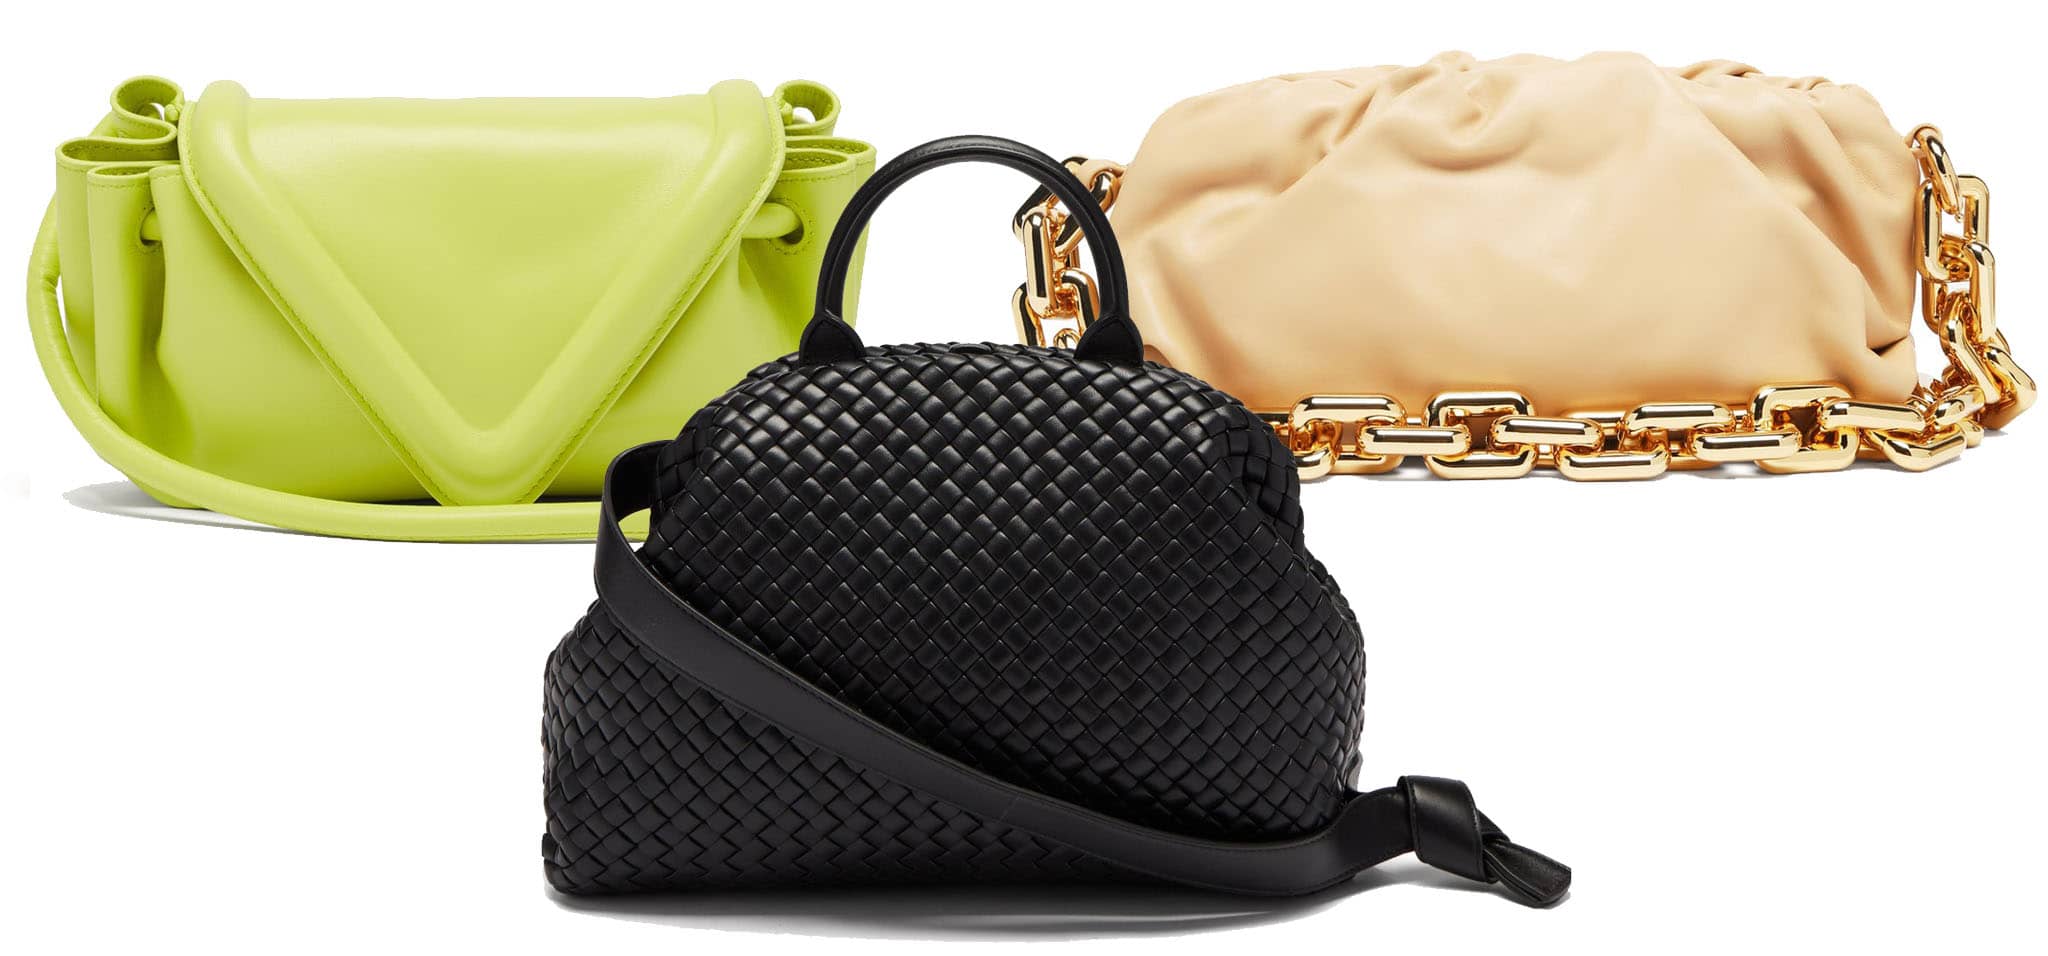 Although authentic Bottega Veneta bags come with hefty price tags, their most popular styles usually sell out fast